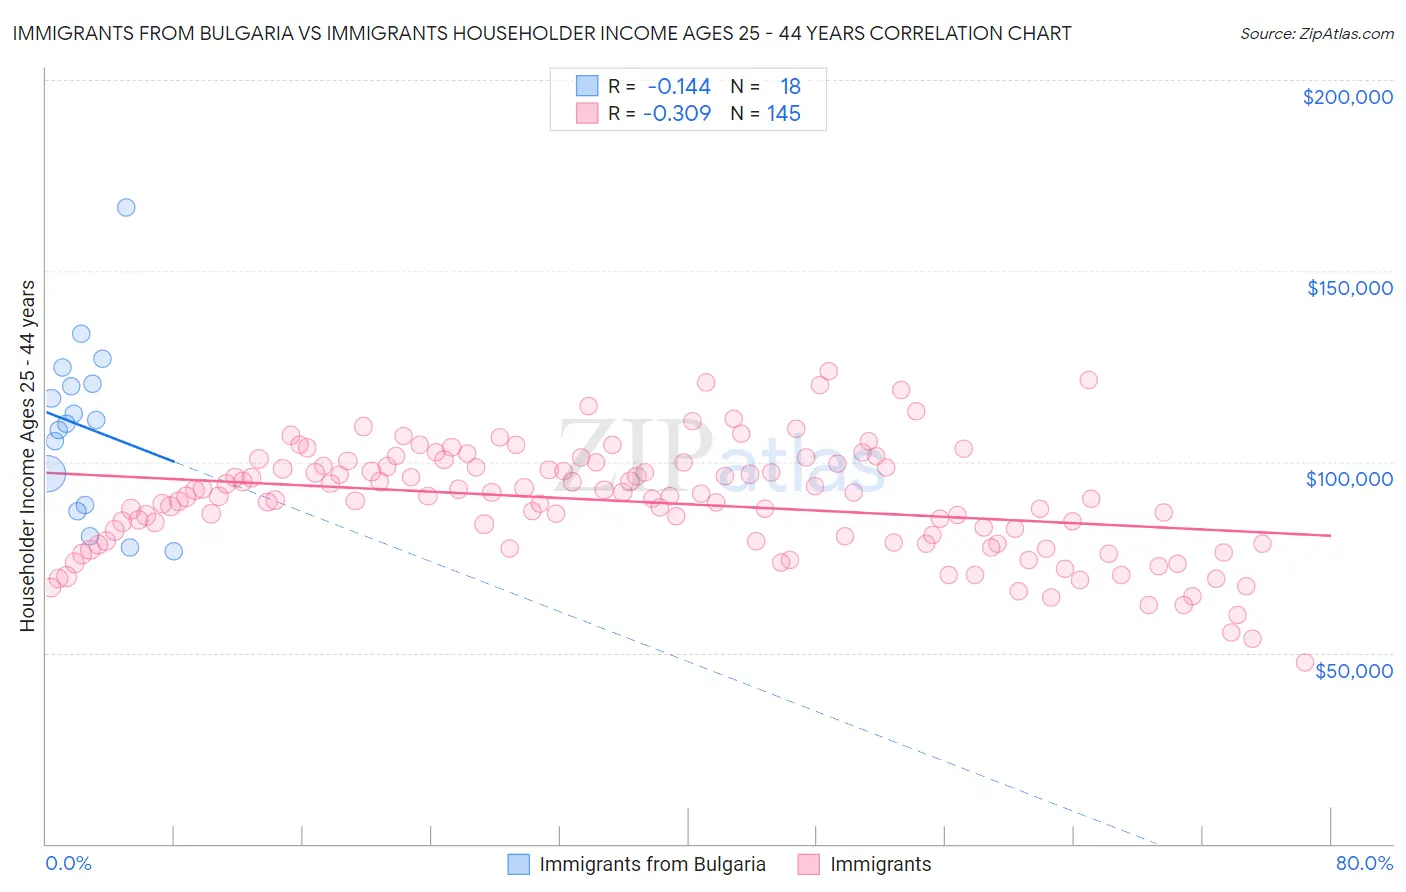 Immigrants from Bulgaria vs Immigrants Householder Income Ages 25 - 44 years